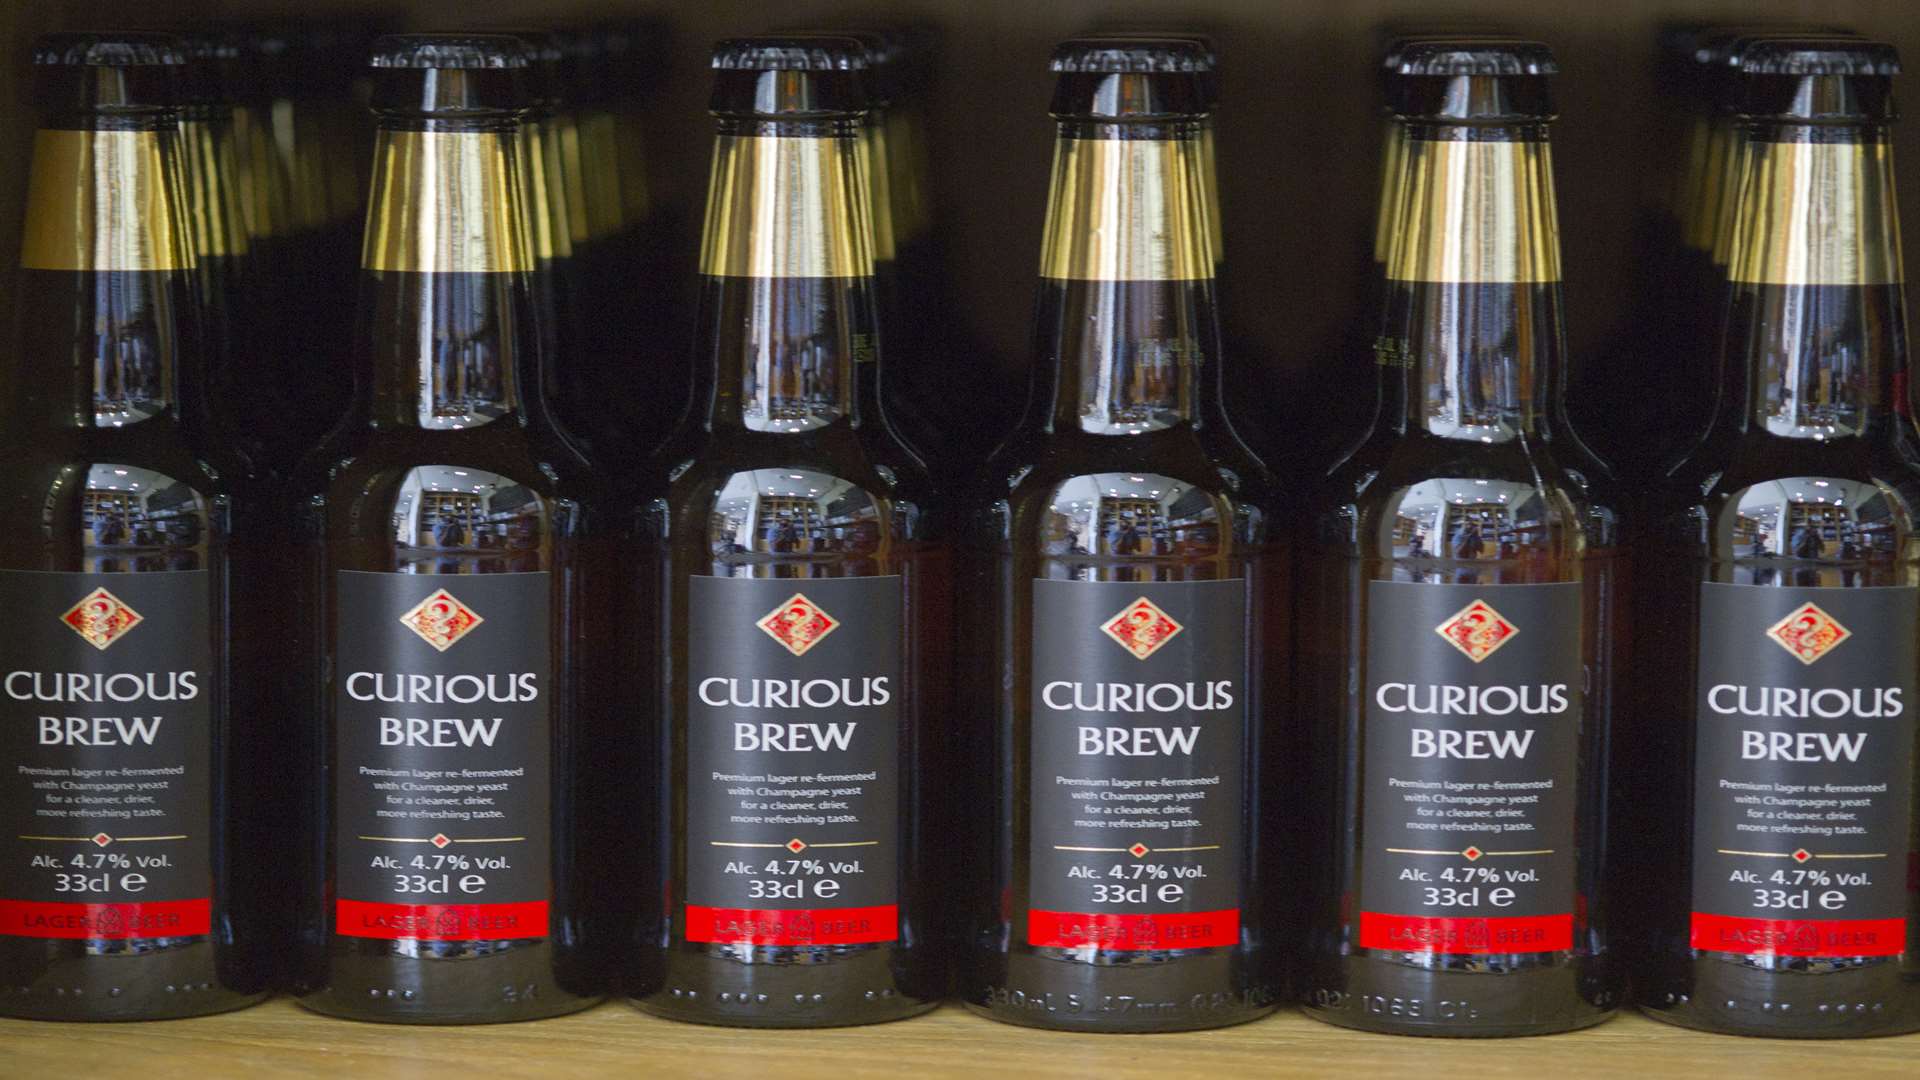 Chapel Down ran a crowdfunding campaign for its Curious Brew beer and cider brand